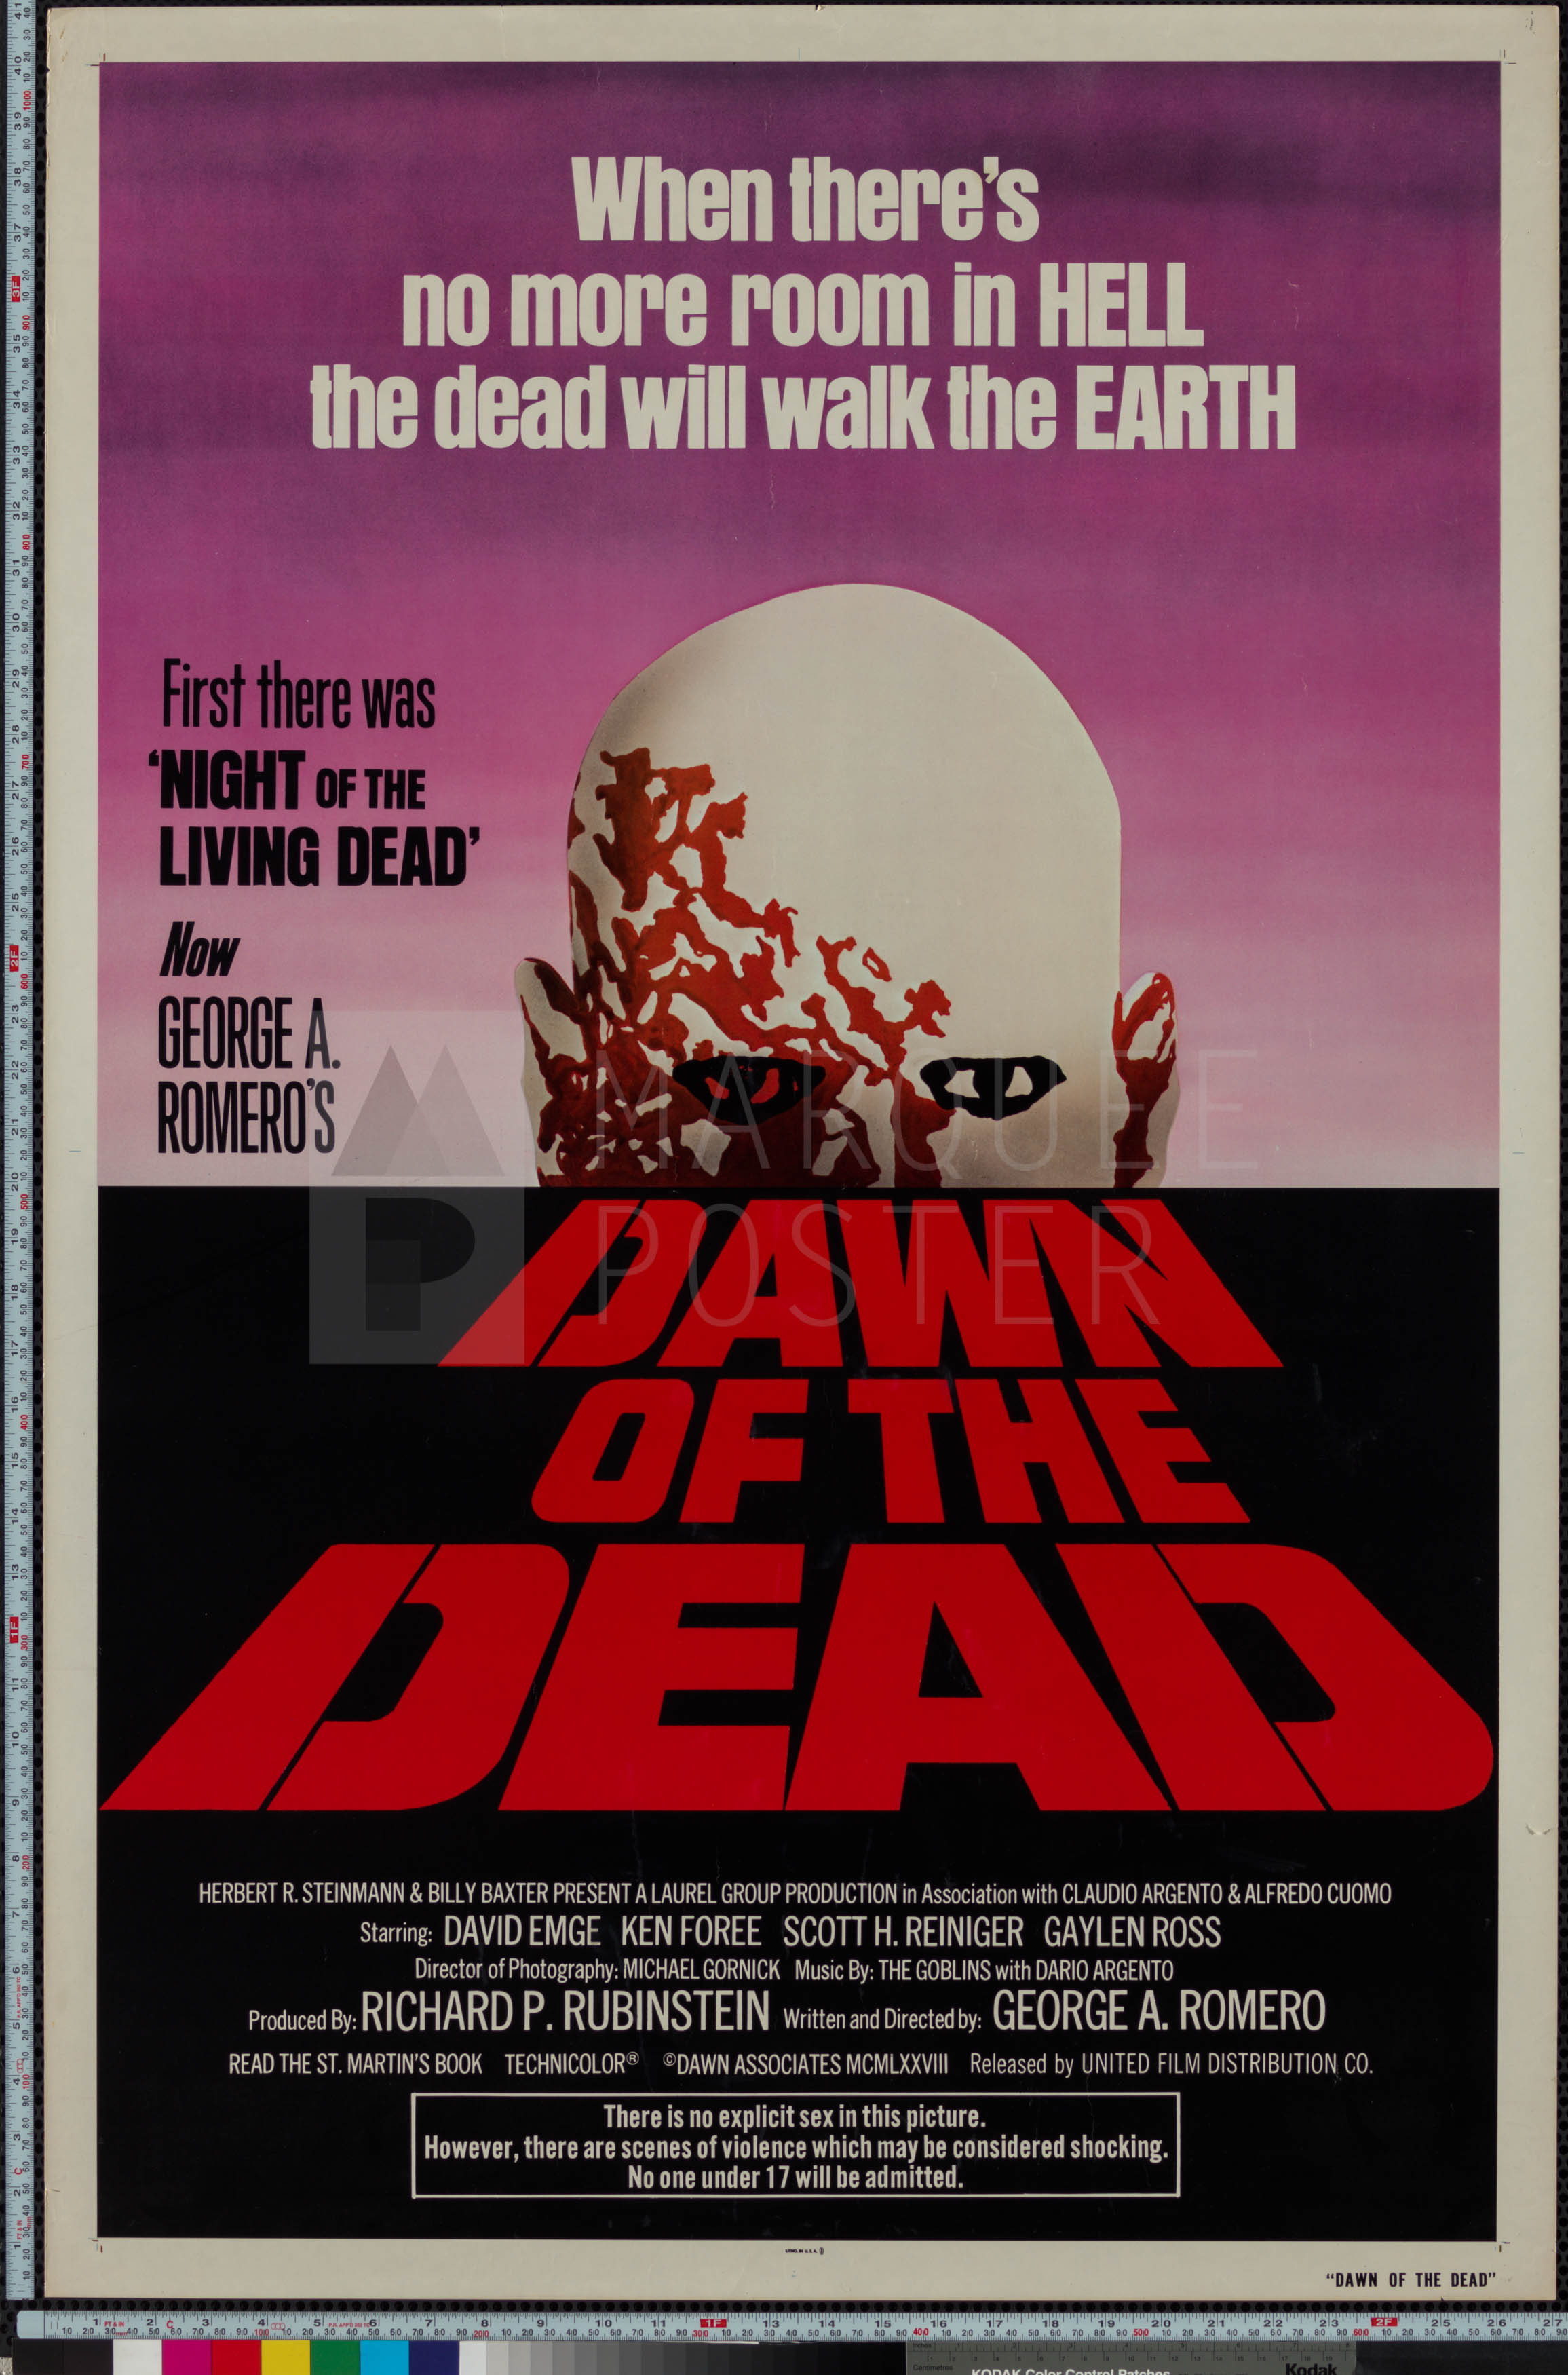 28-dawn-of-the-dead-red-title-style-us-1-sheet-1978-02